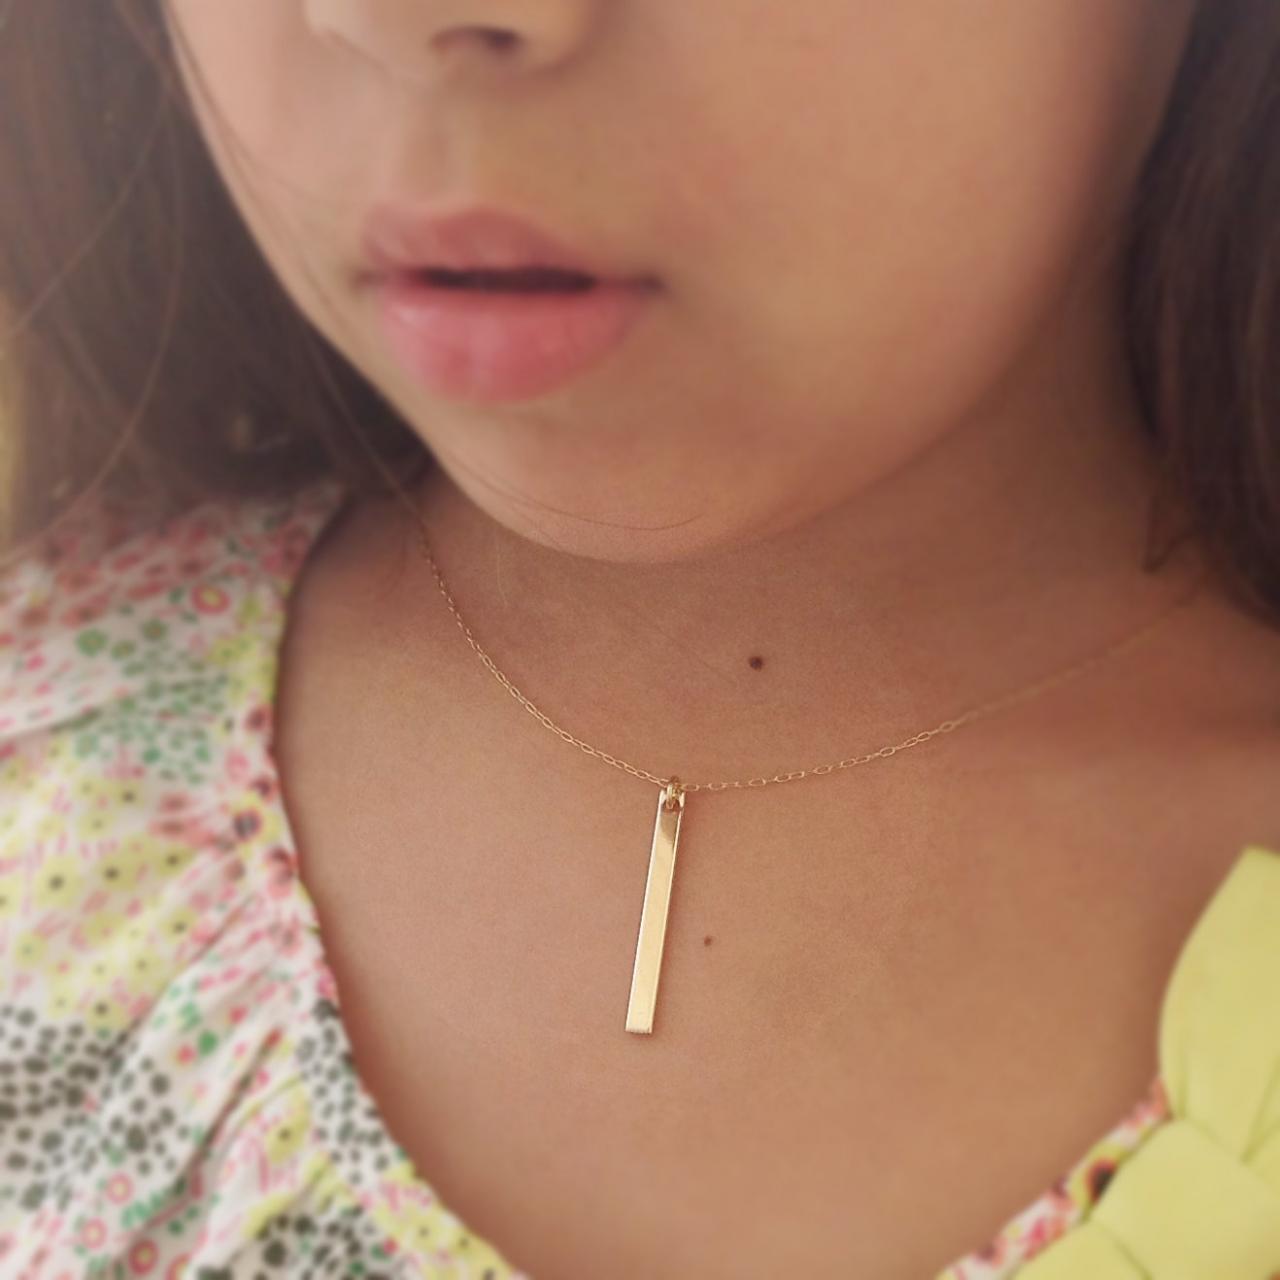 Gold Bar Necklace, Bar Necklace, Gold Bar Jewelry, Simple Necklace, Everyday Necklace D24